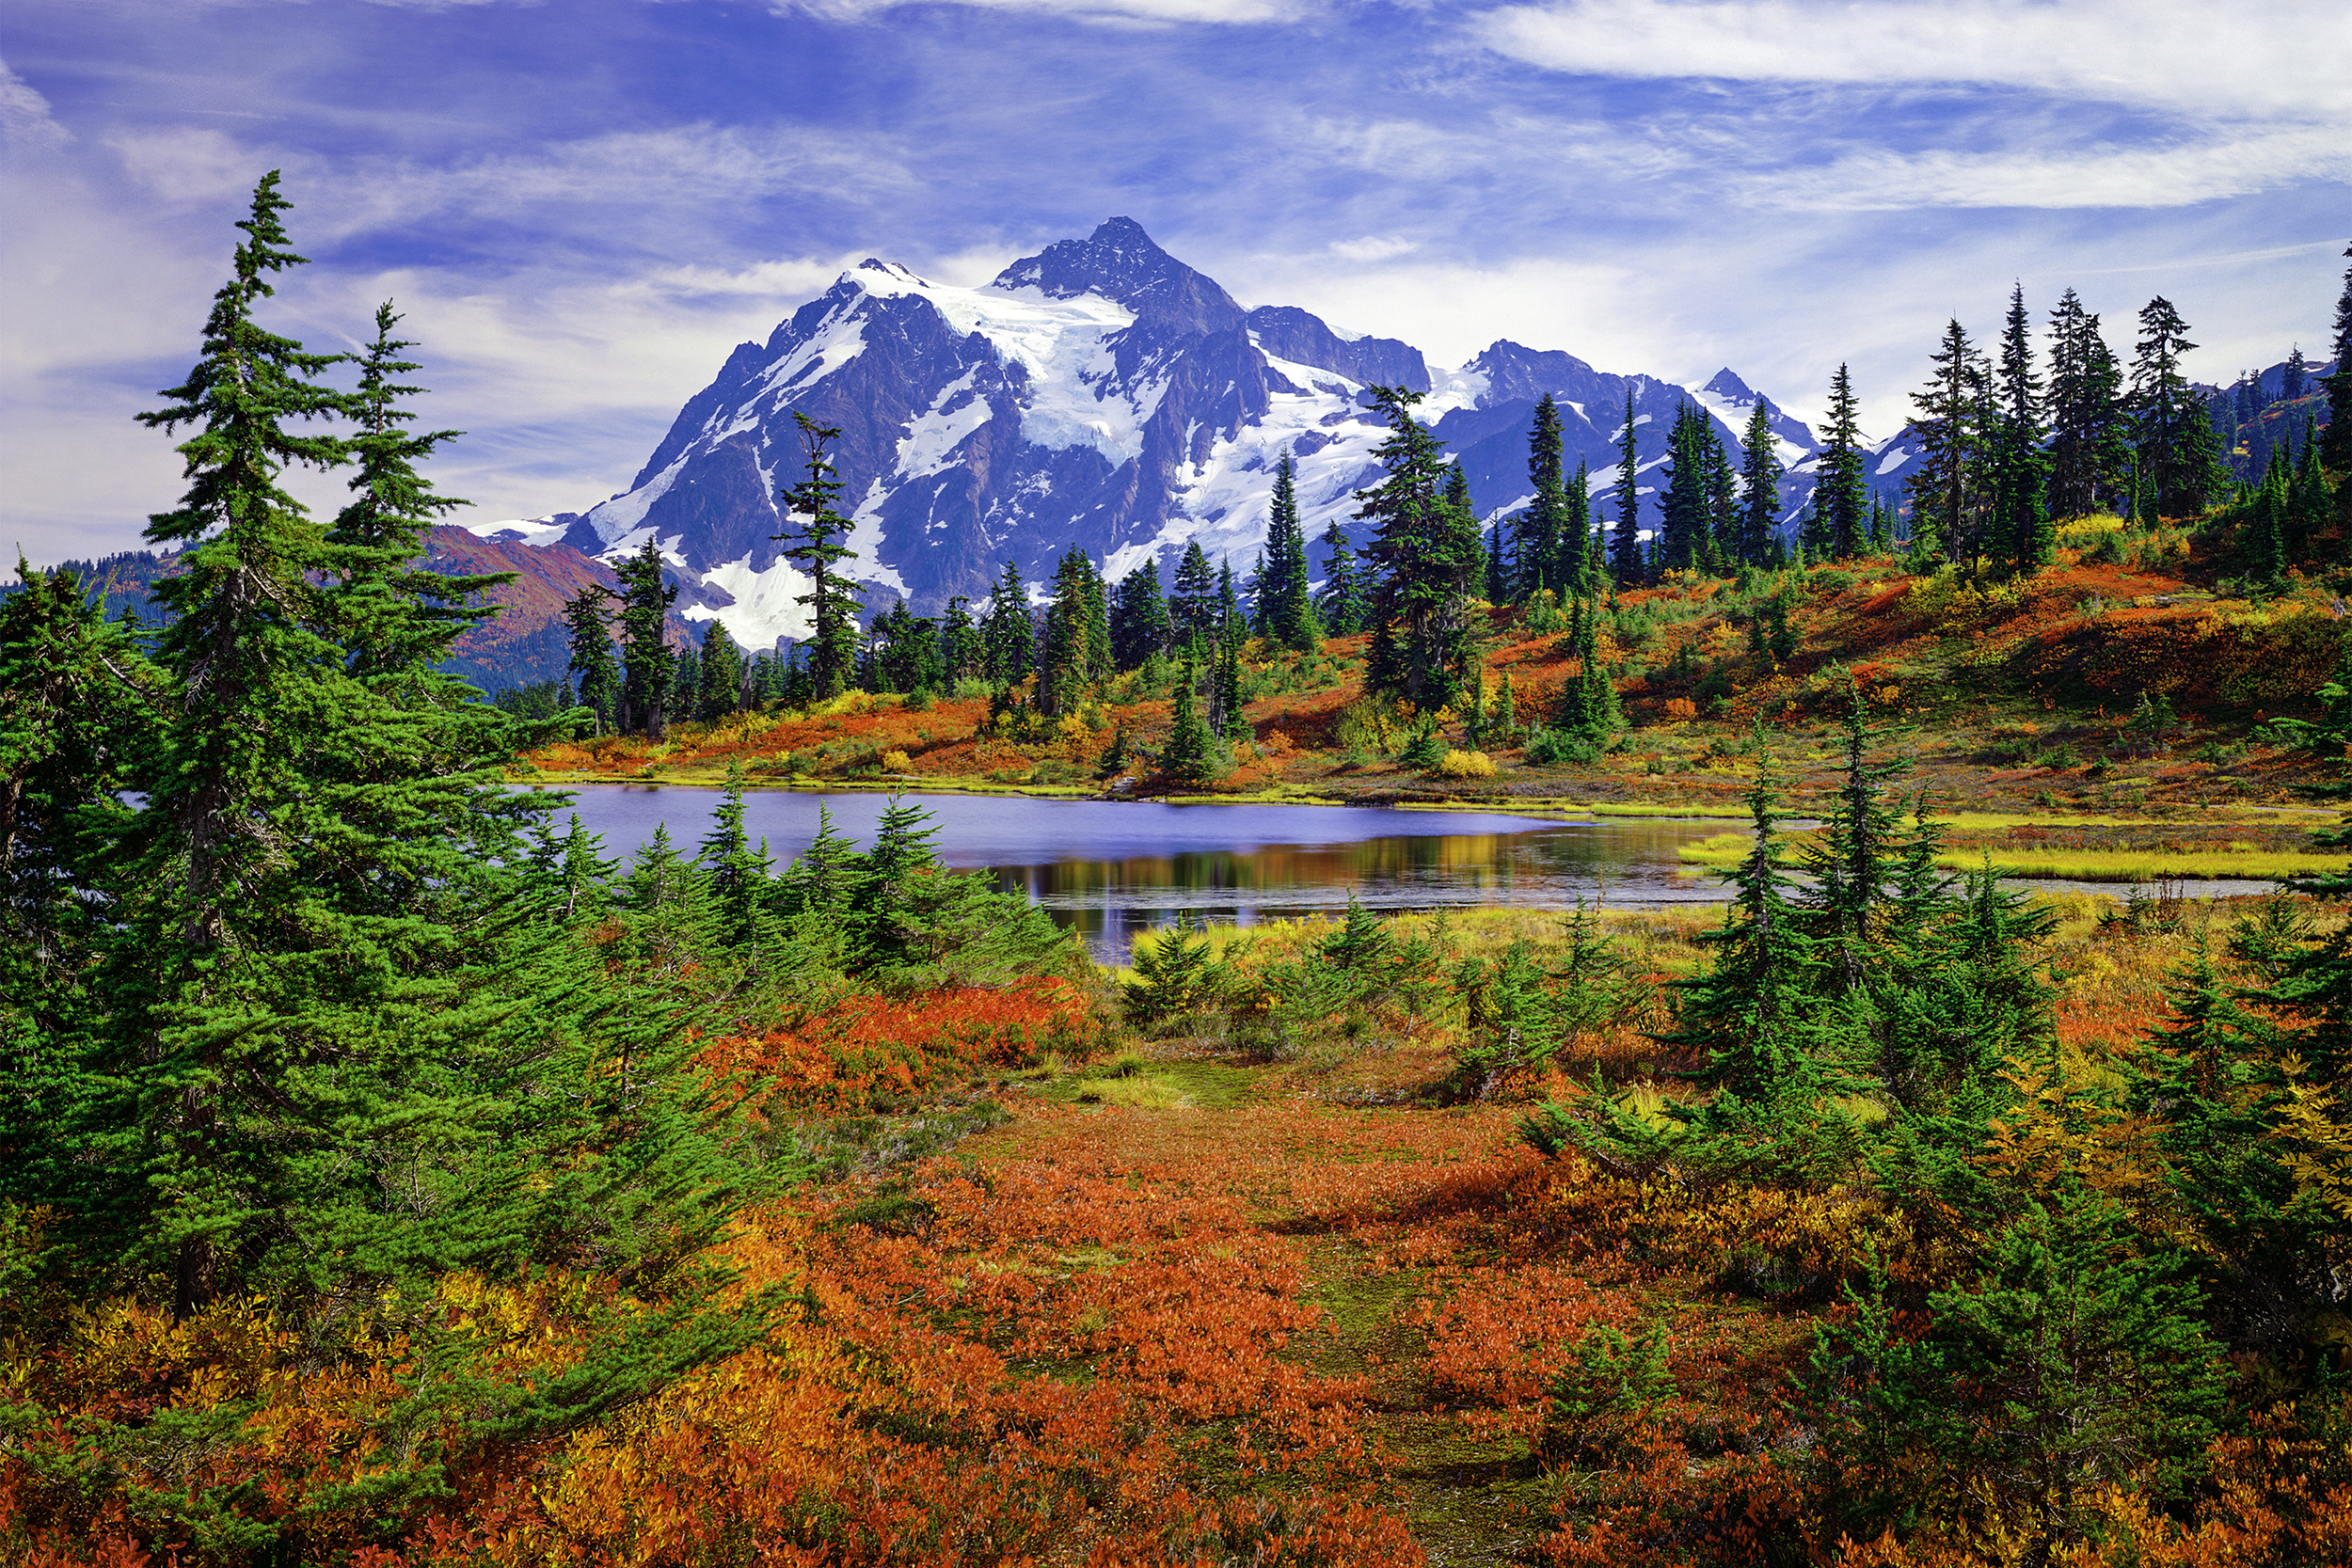 <p><a href="https://www.nps.gov/noca/index.htm">North Cascades National Park</a>, established in 1968, is another national park famous for its glaciers, and there are more than 300 here. Visitors will also find forested valleys, steep mountains, and waterfalls. </p>